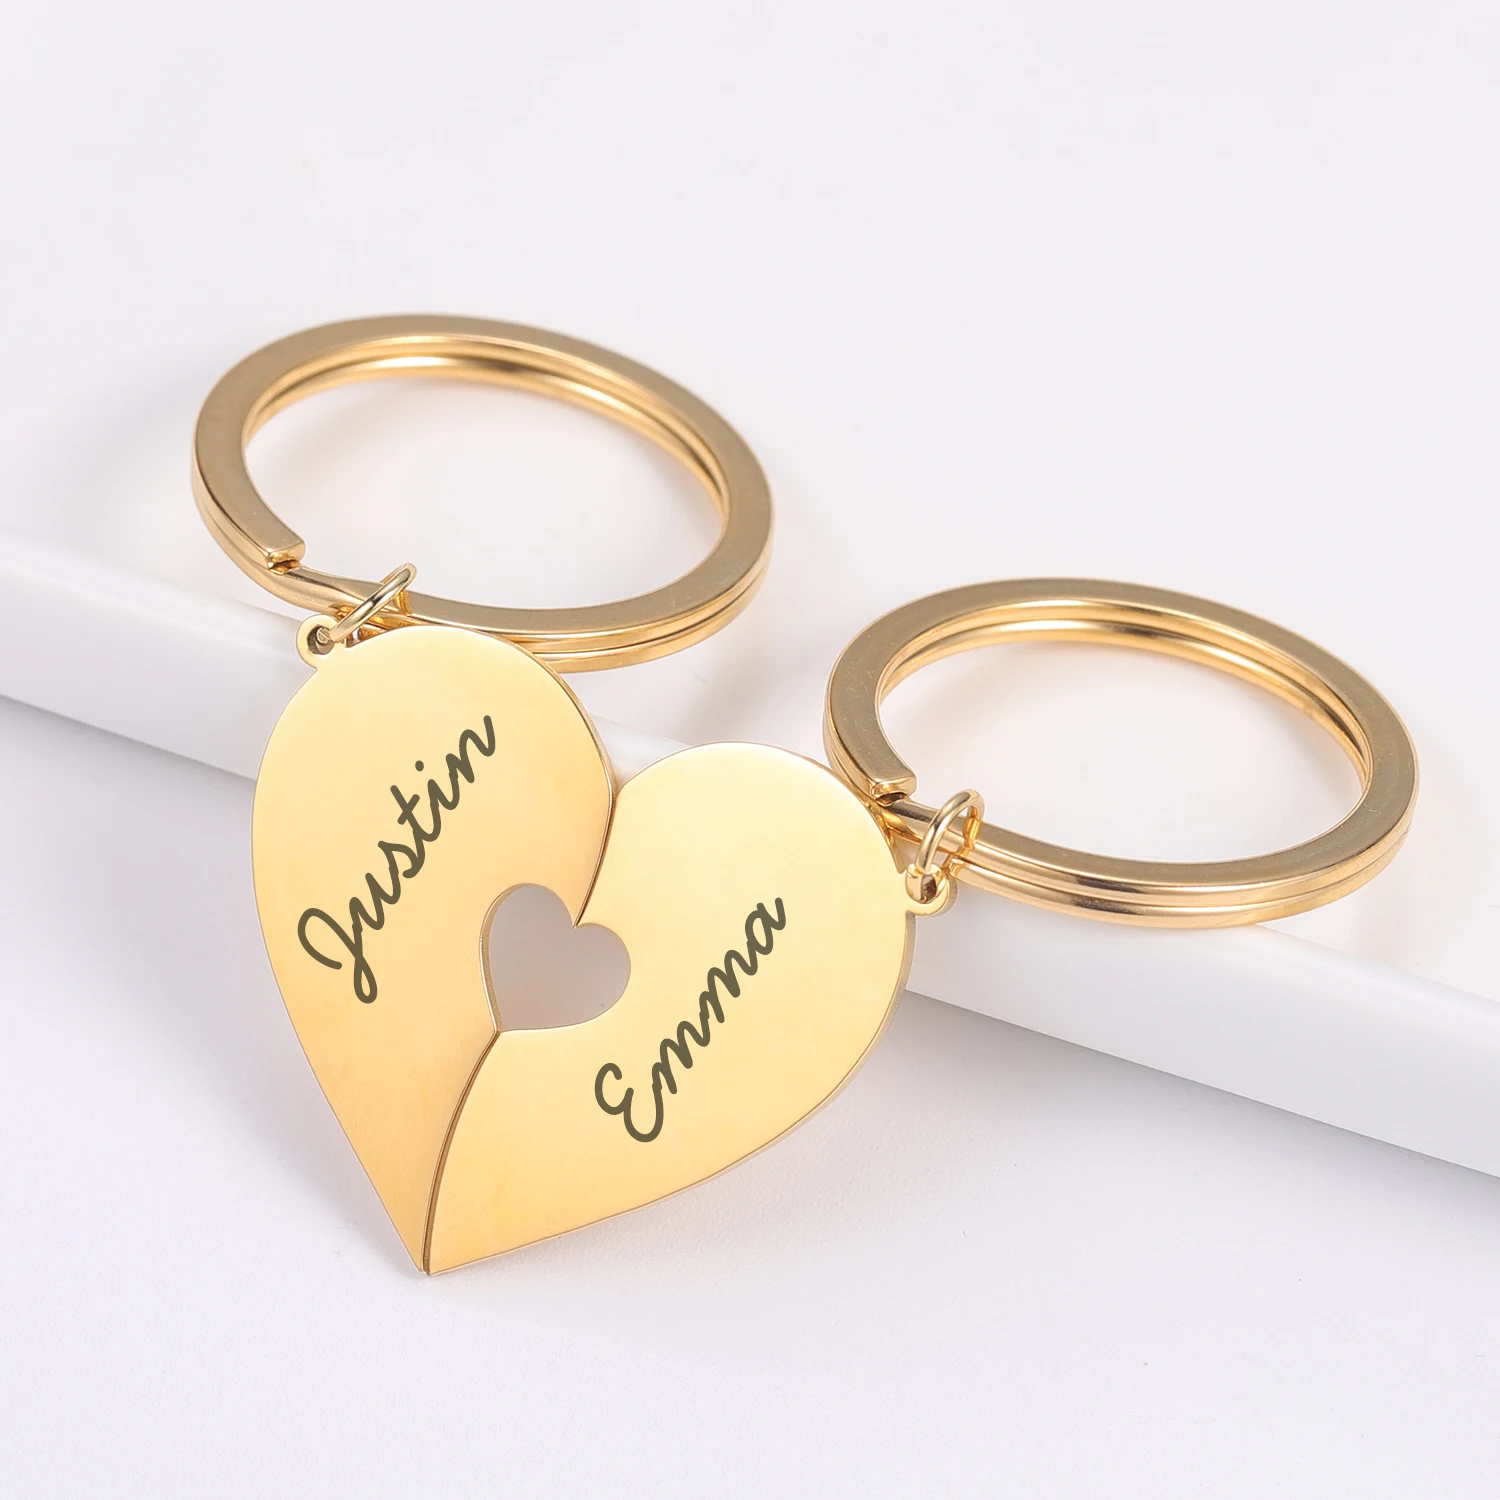 2Pcs Personalized Couples Keychain Valentine Anniversary Gift Boyfriend Girlfriend Heart KeyChain Man Women Key Chain Love Gifts silicone epoxy mold diy keychain crafting mould for valentine gift dropship